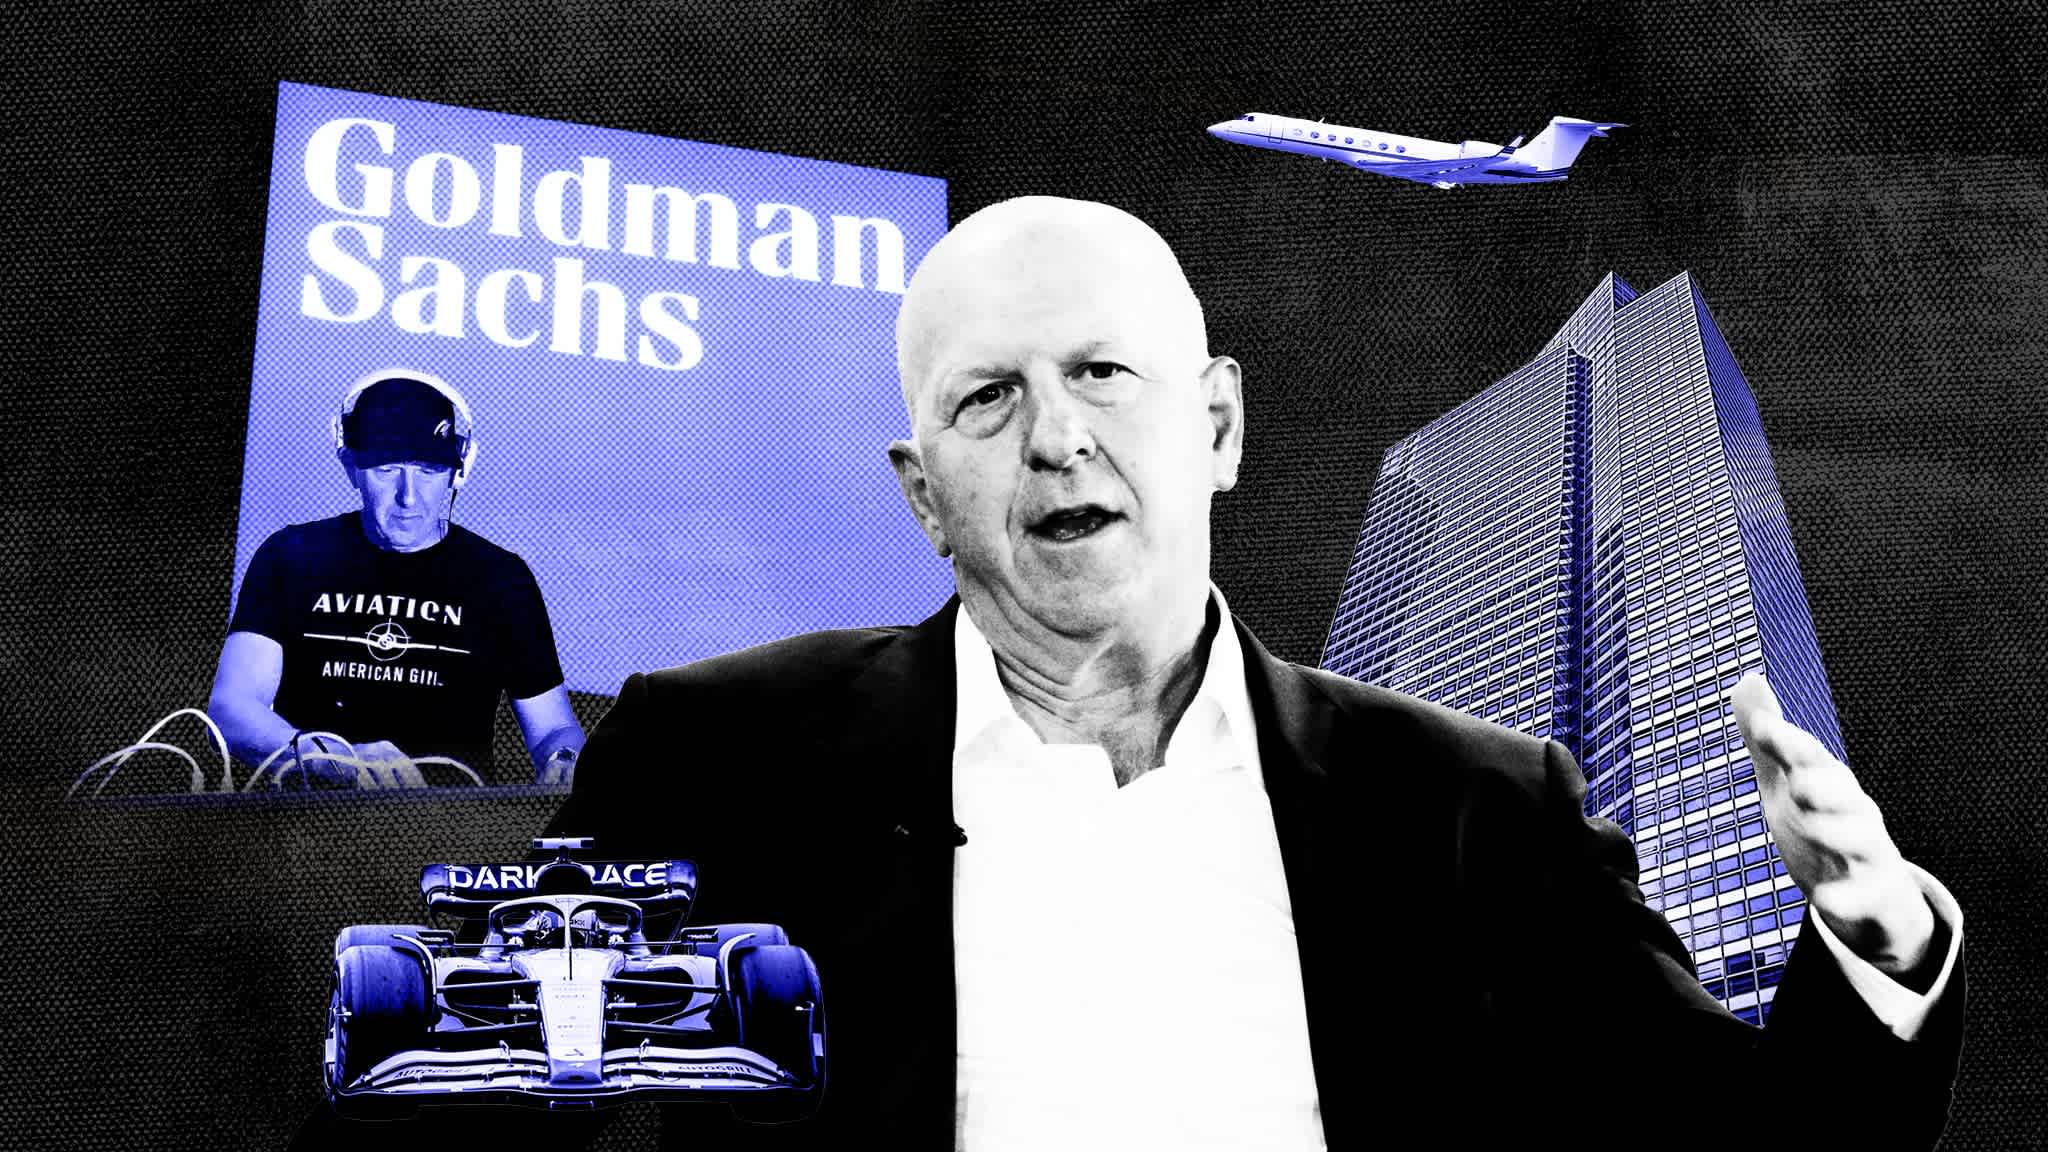 The reinvention of Goldman Sachs: what has David Solomon achieved?